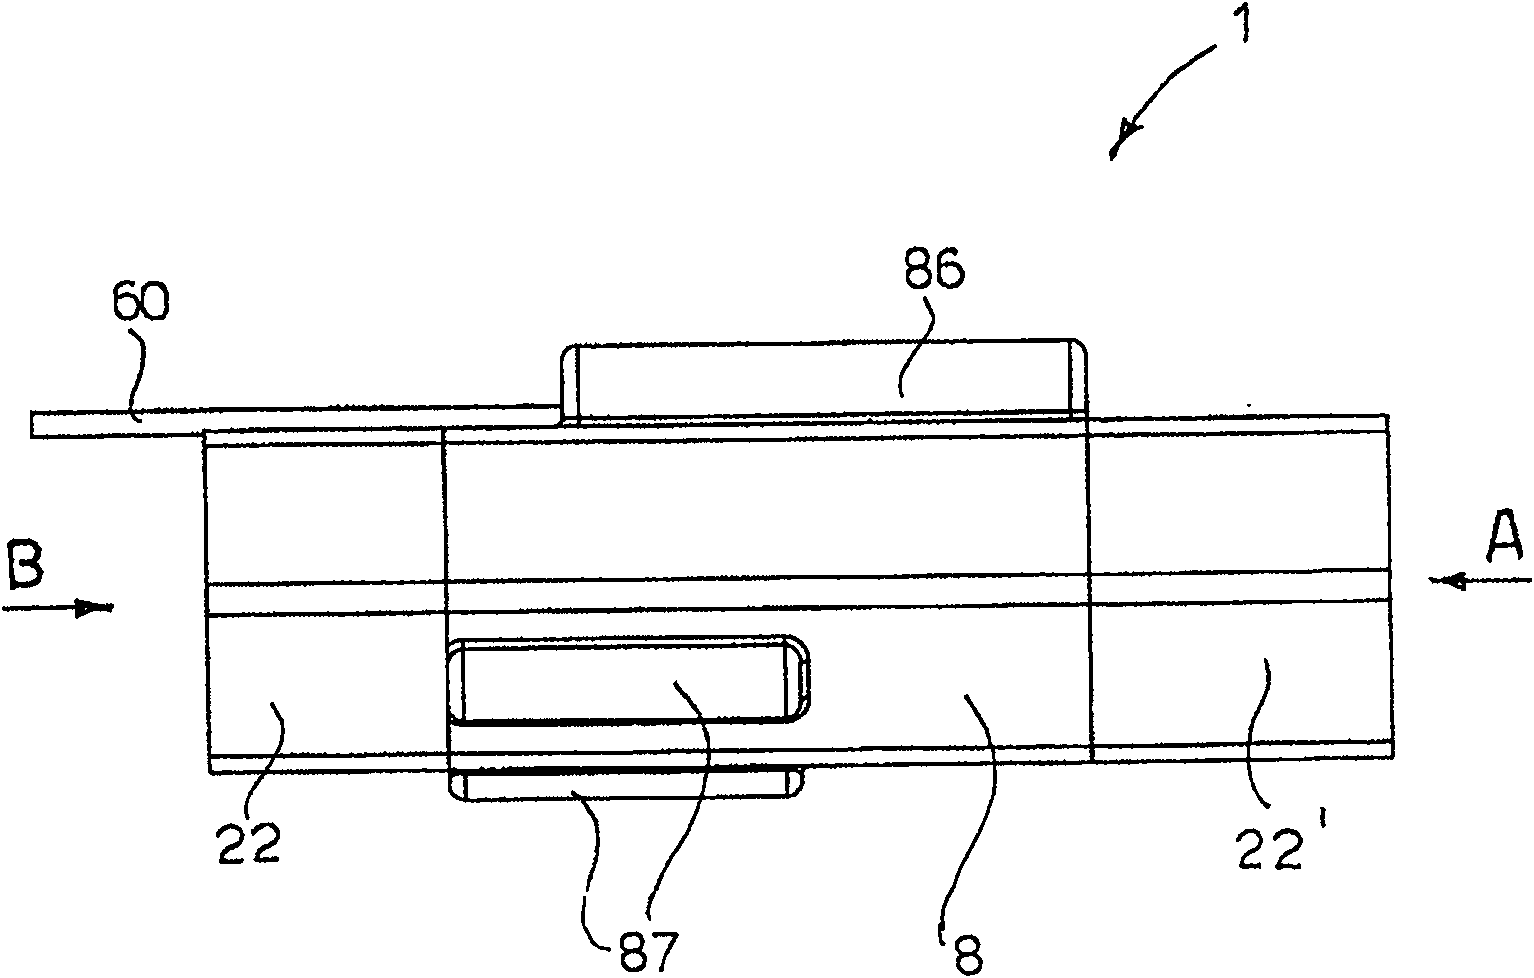 Magnetic flow switch, for aspirators in particular